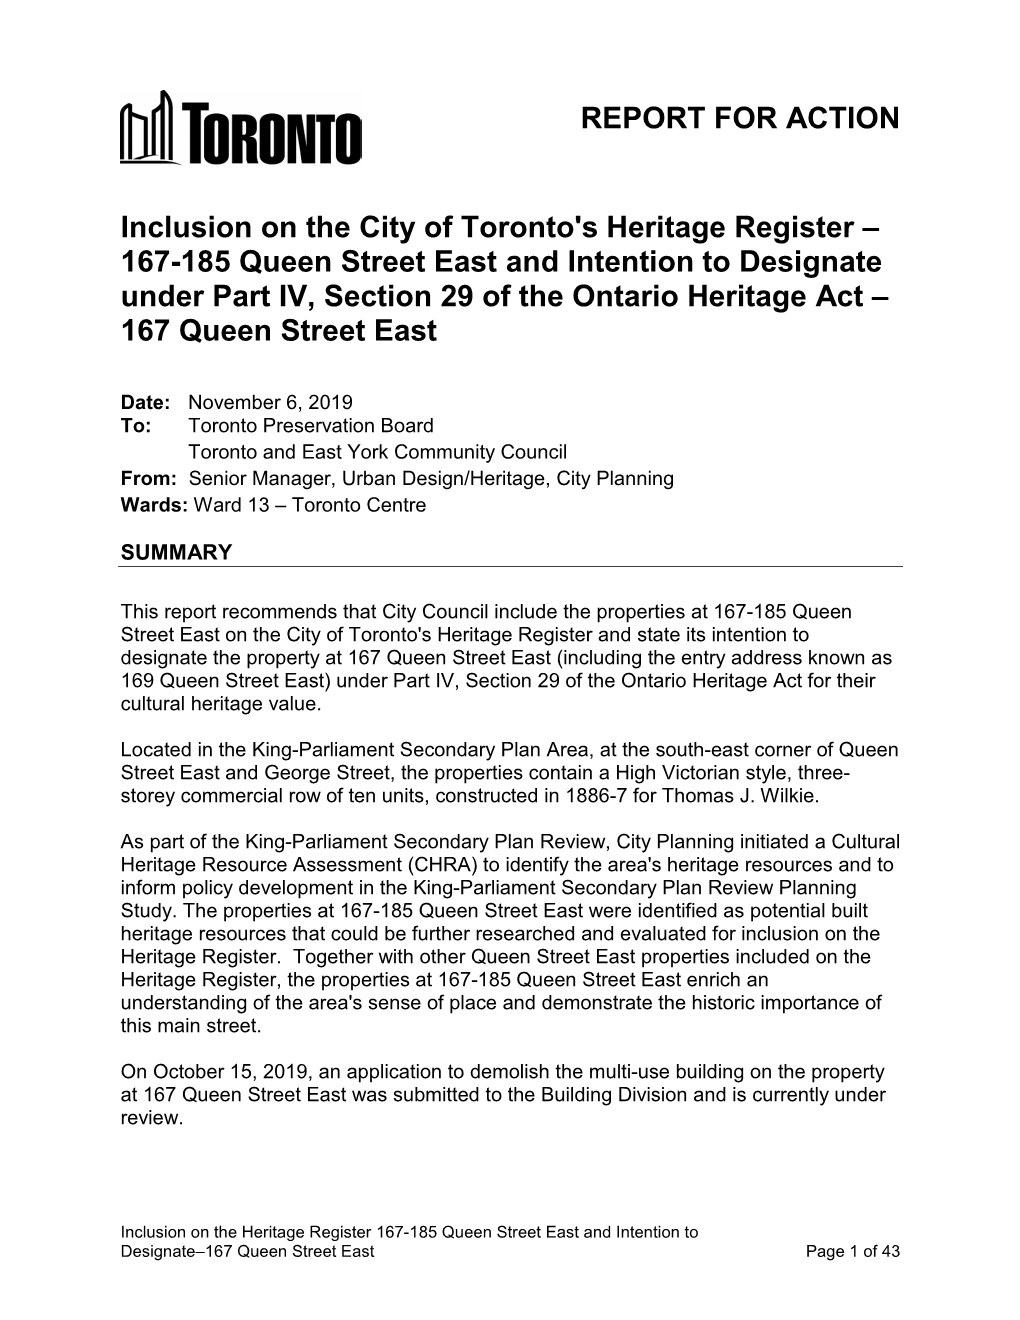 167-185 Queen Street East and Intention to Designate Under Part IV, Section 29 of the Ontario Heritage Act – 167 Queen Street East